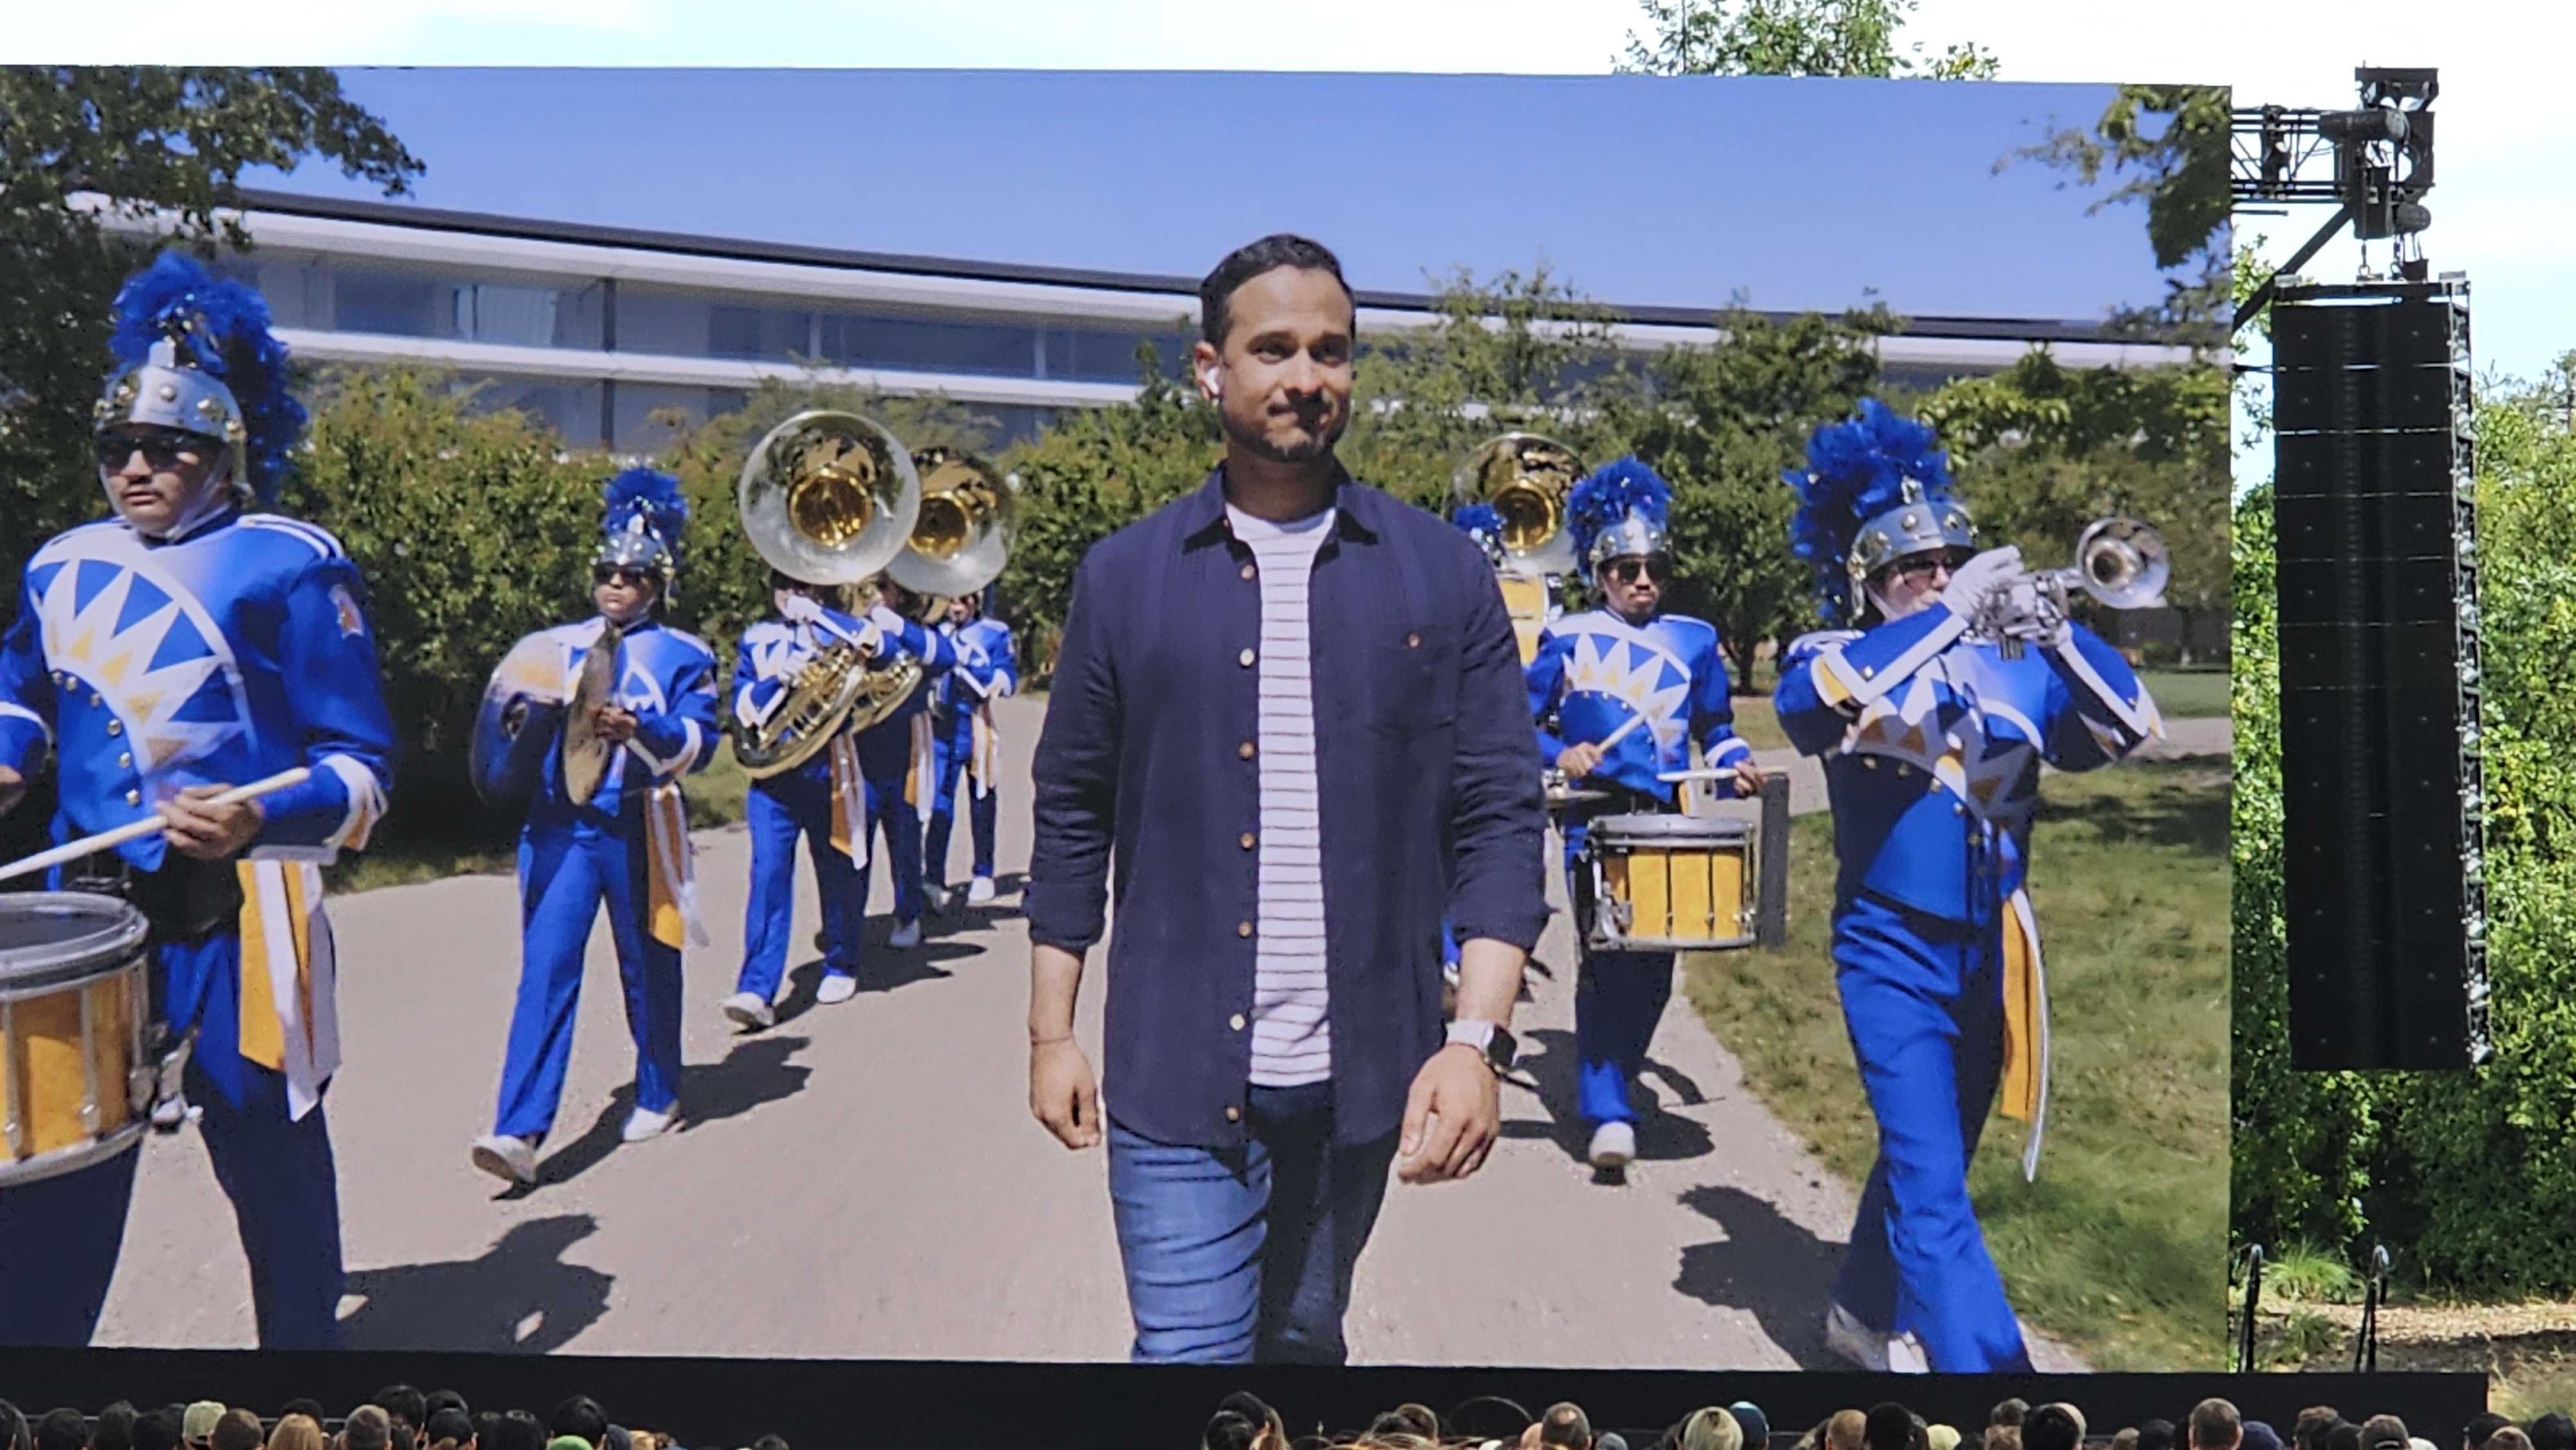 AirPods demo with marching band